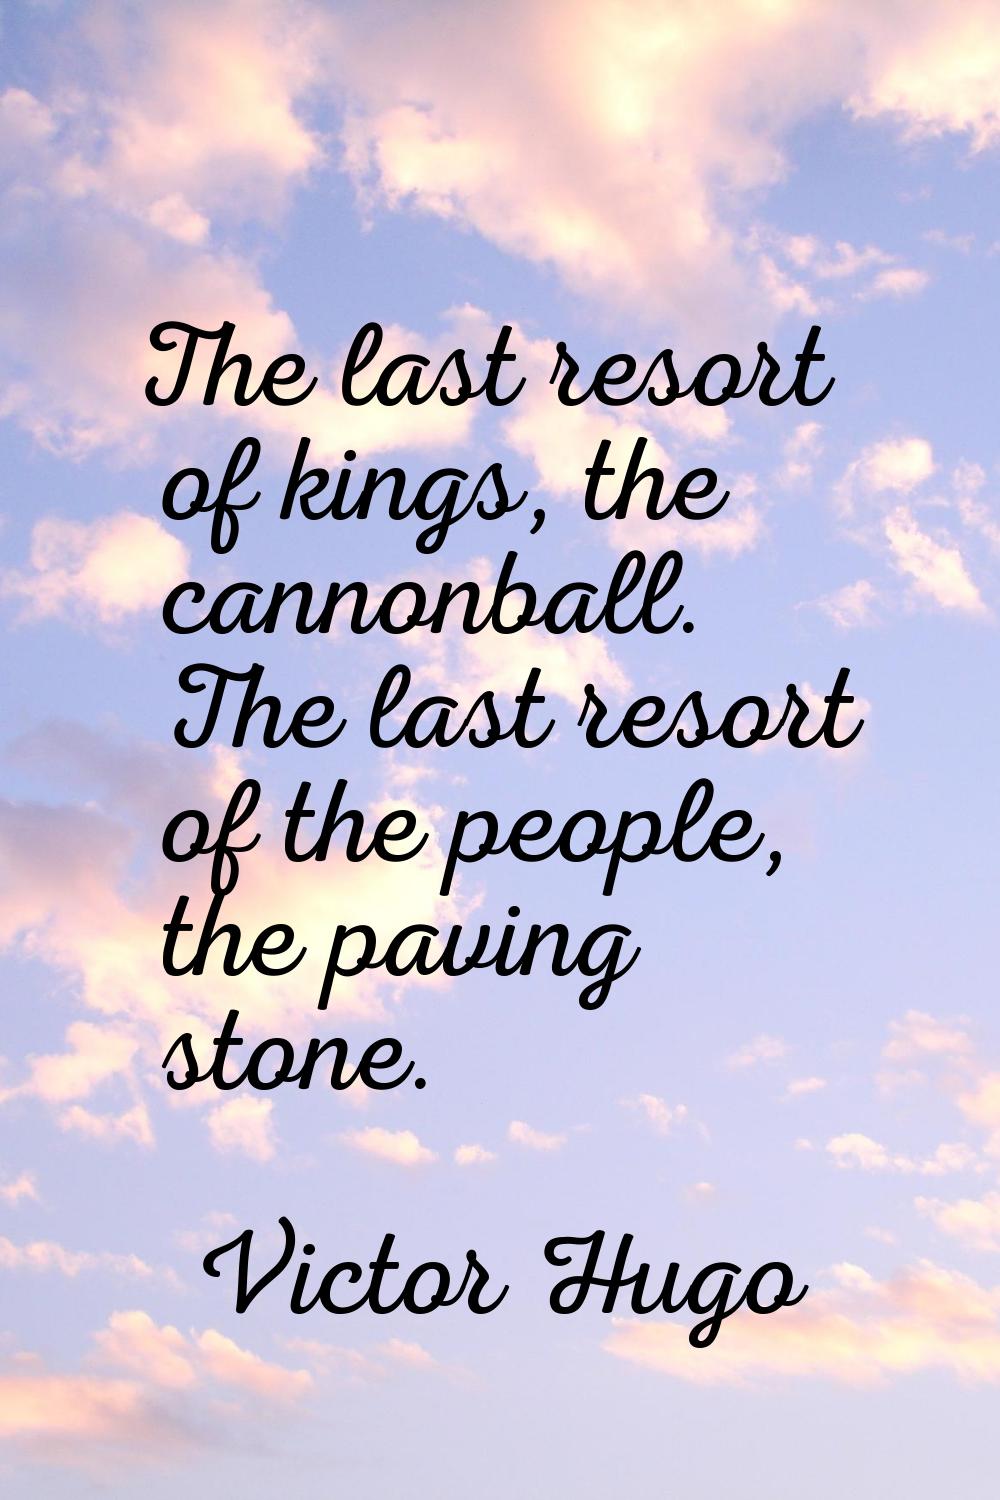 The last resort of kings, the cannonball. The last resort of the people, the paving stone.